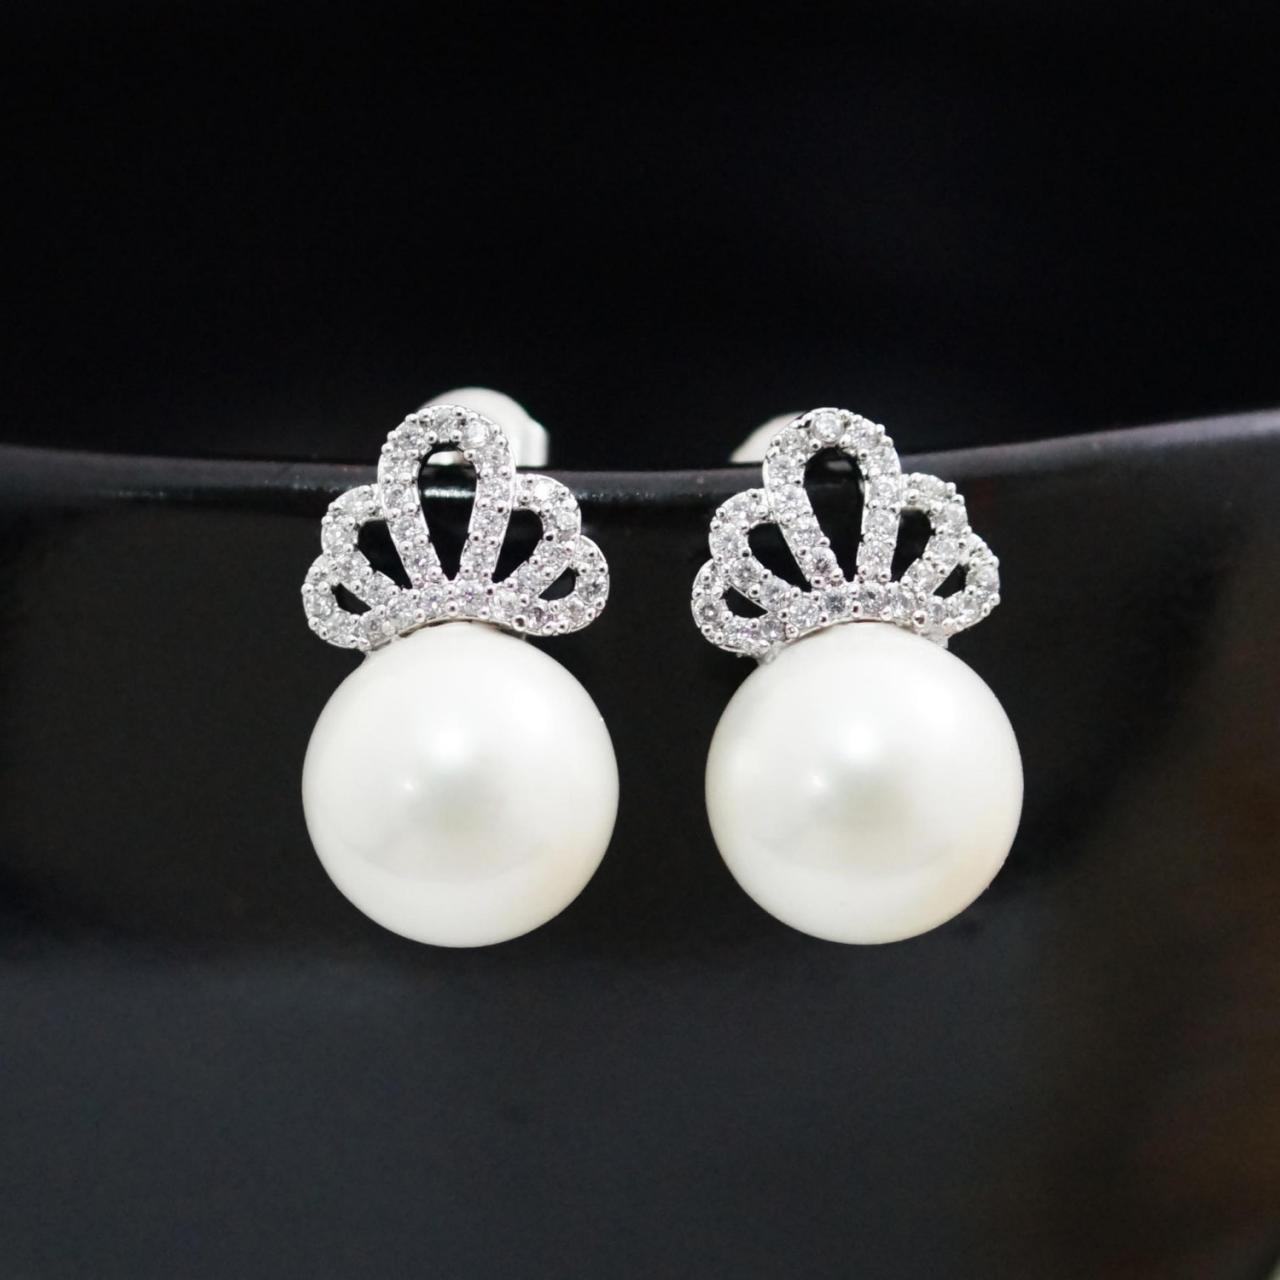 Wedding Jewelry Bridal Earrings Bridesmaid Earrings Cz Ear Posts With White Shell Based Pearl Dangle Earrings Pearl Jewelry Pearl Earrings